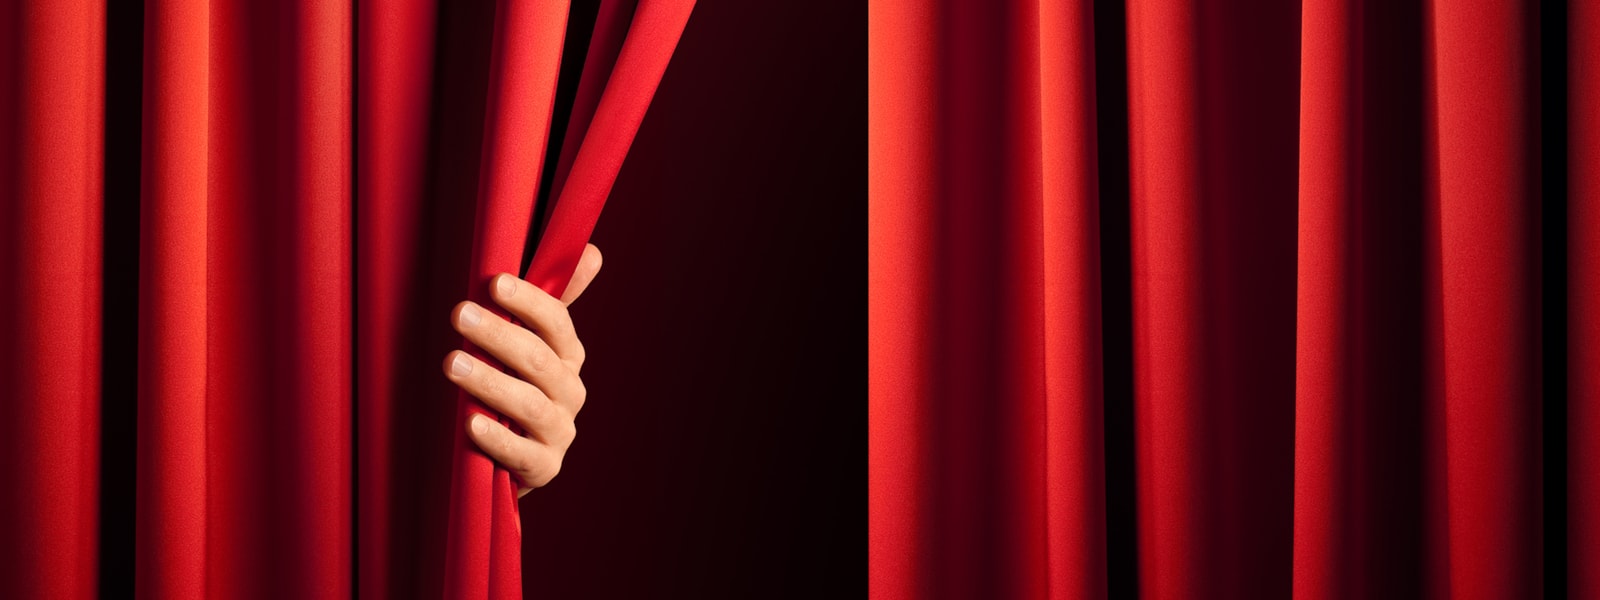 person opening Curtain